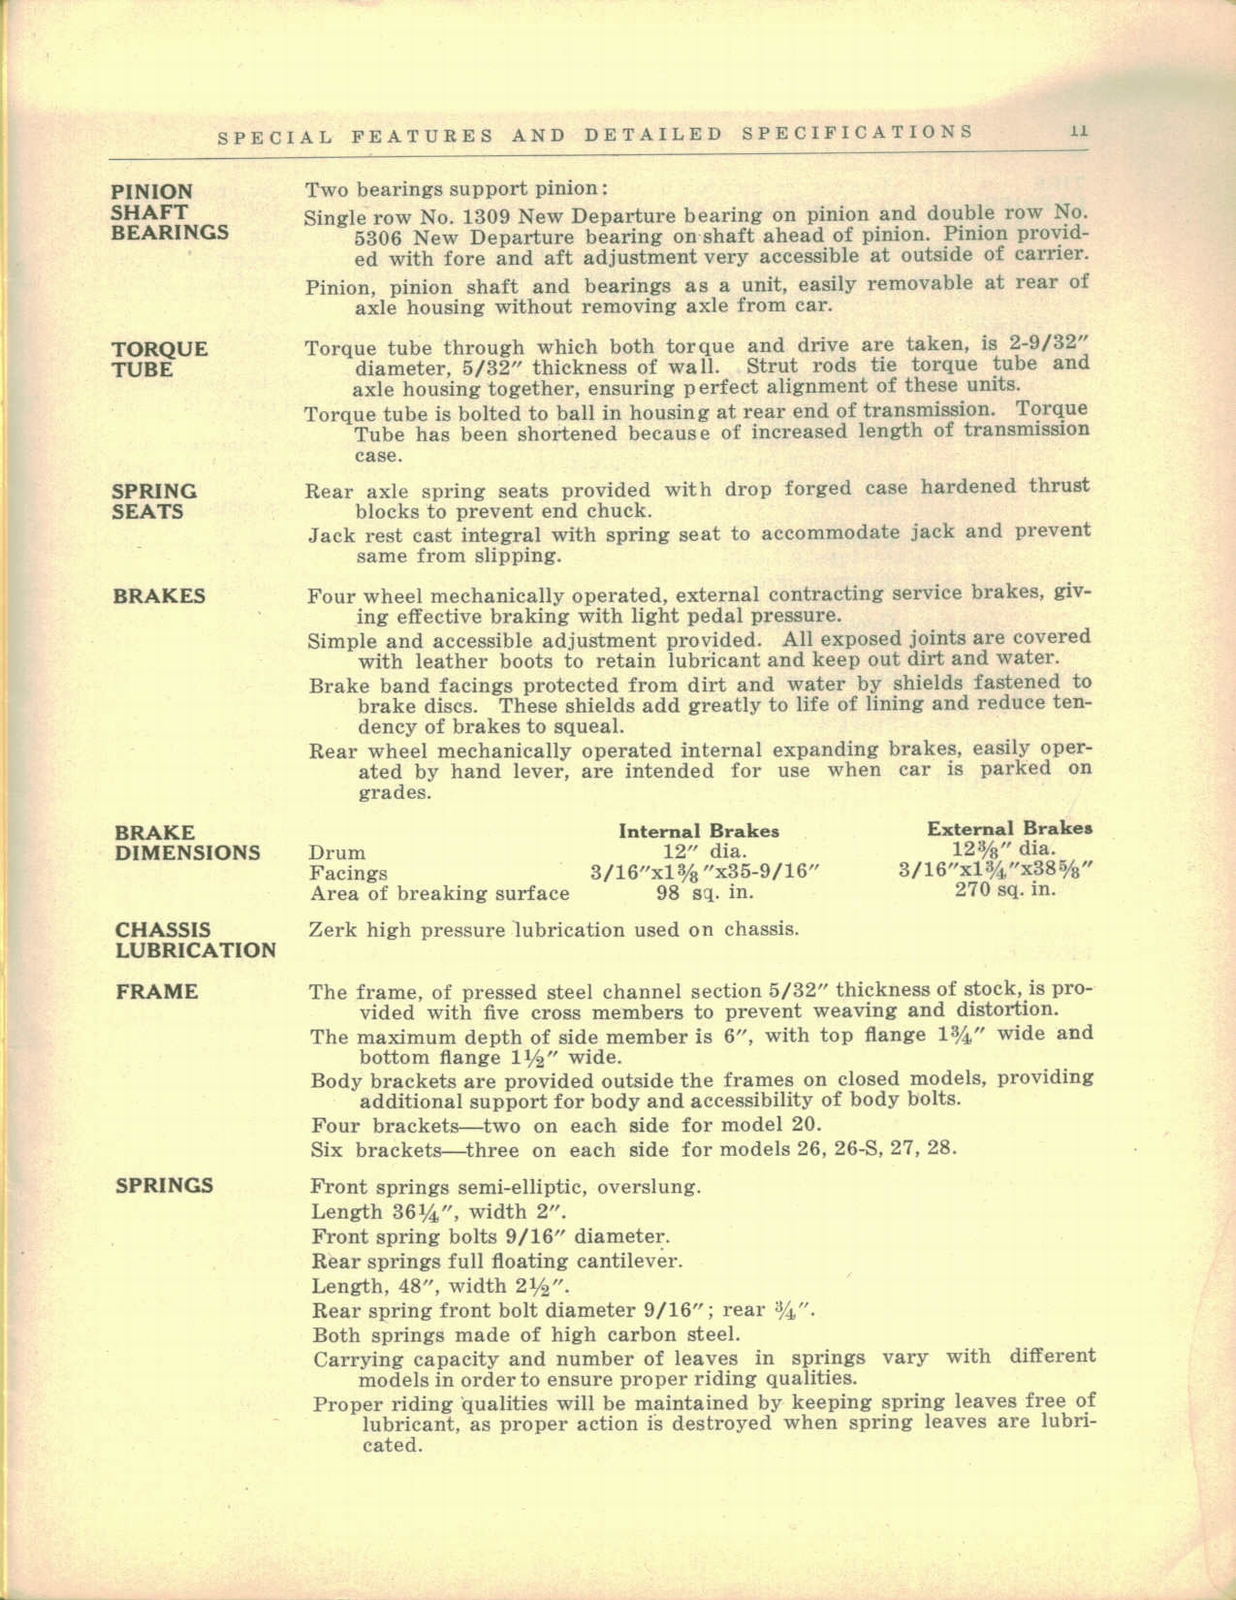 n_1927 Buick Special Features and Specs-11.jpg